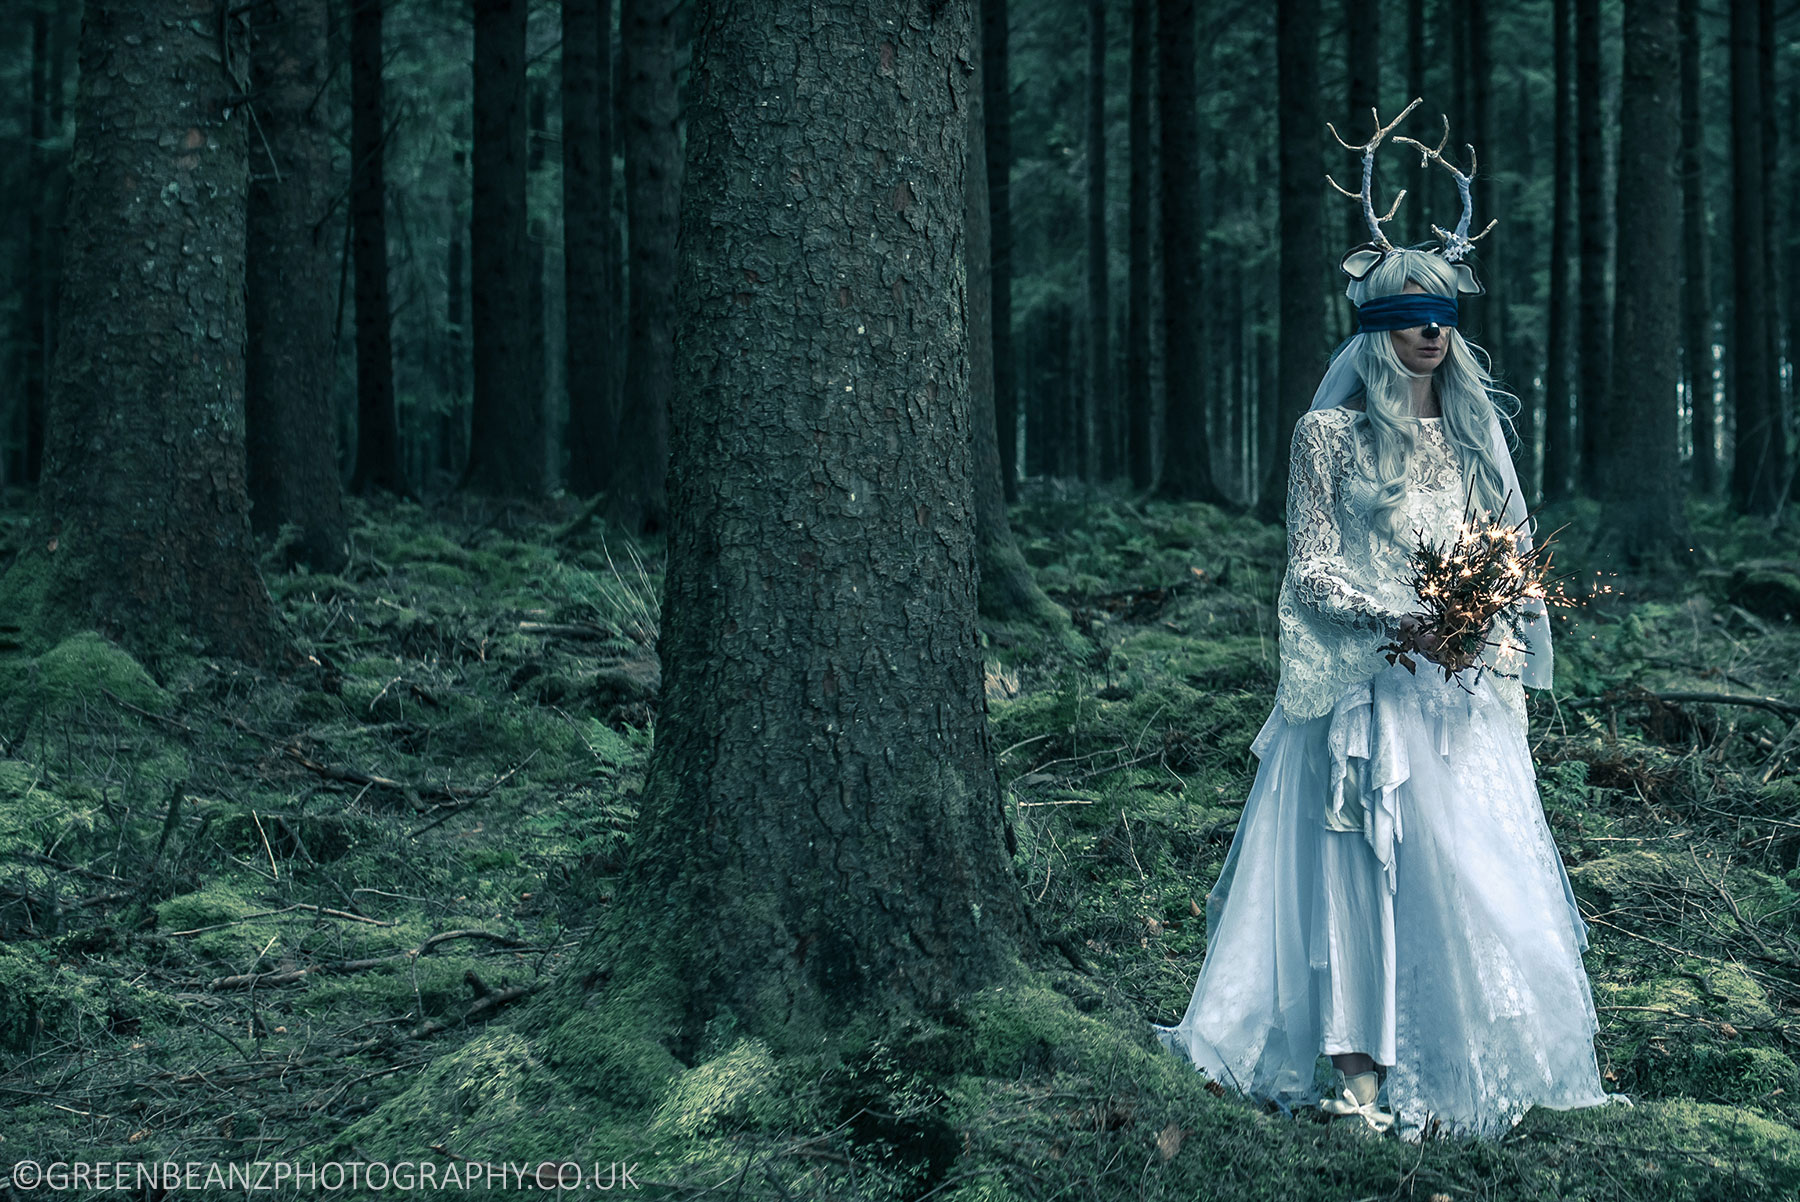 Plymouth Commercial photograph of Woman in white wedding dress in forest